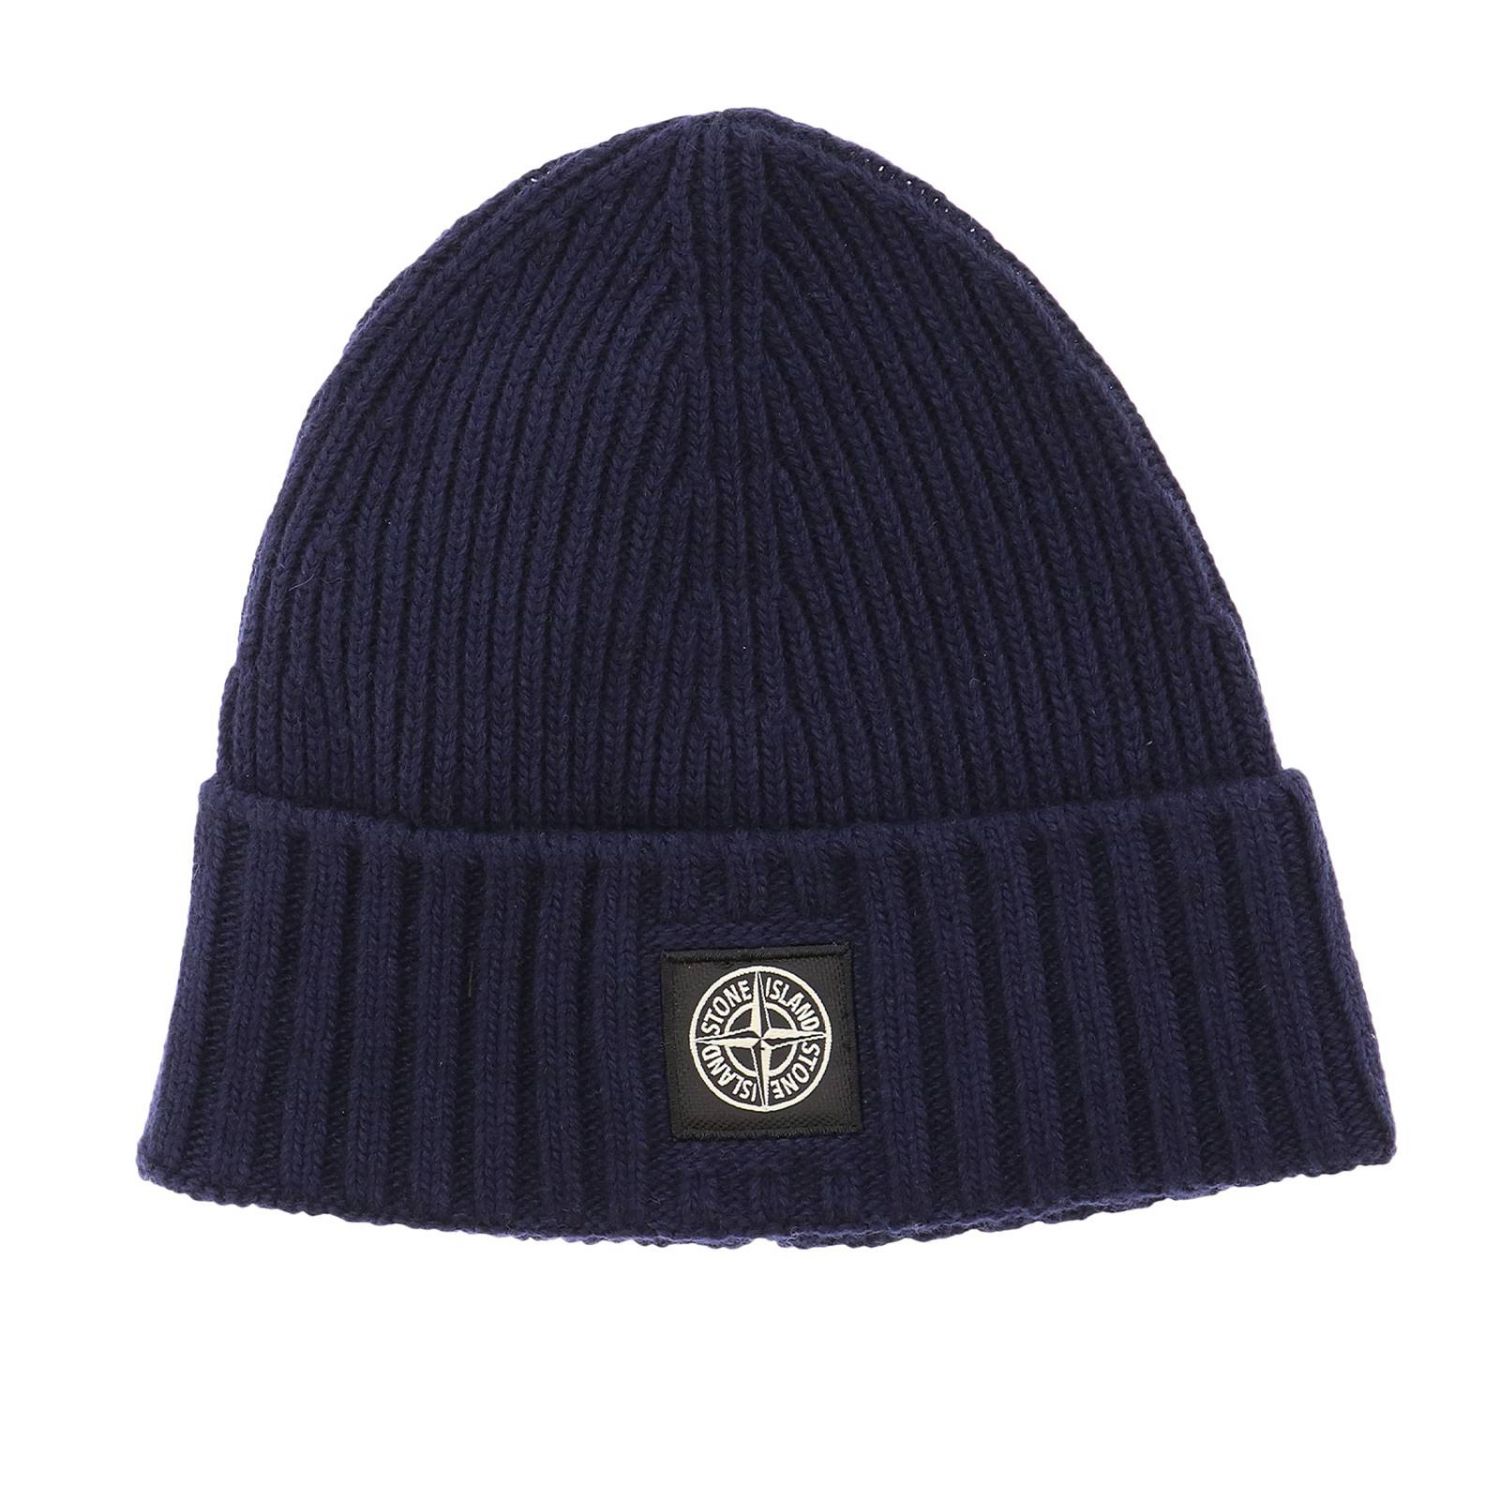 Stone Island Junior Outlet: hat for kids - Blue | Stone Island Junior ...